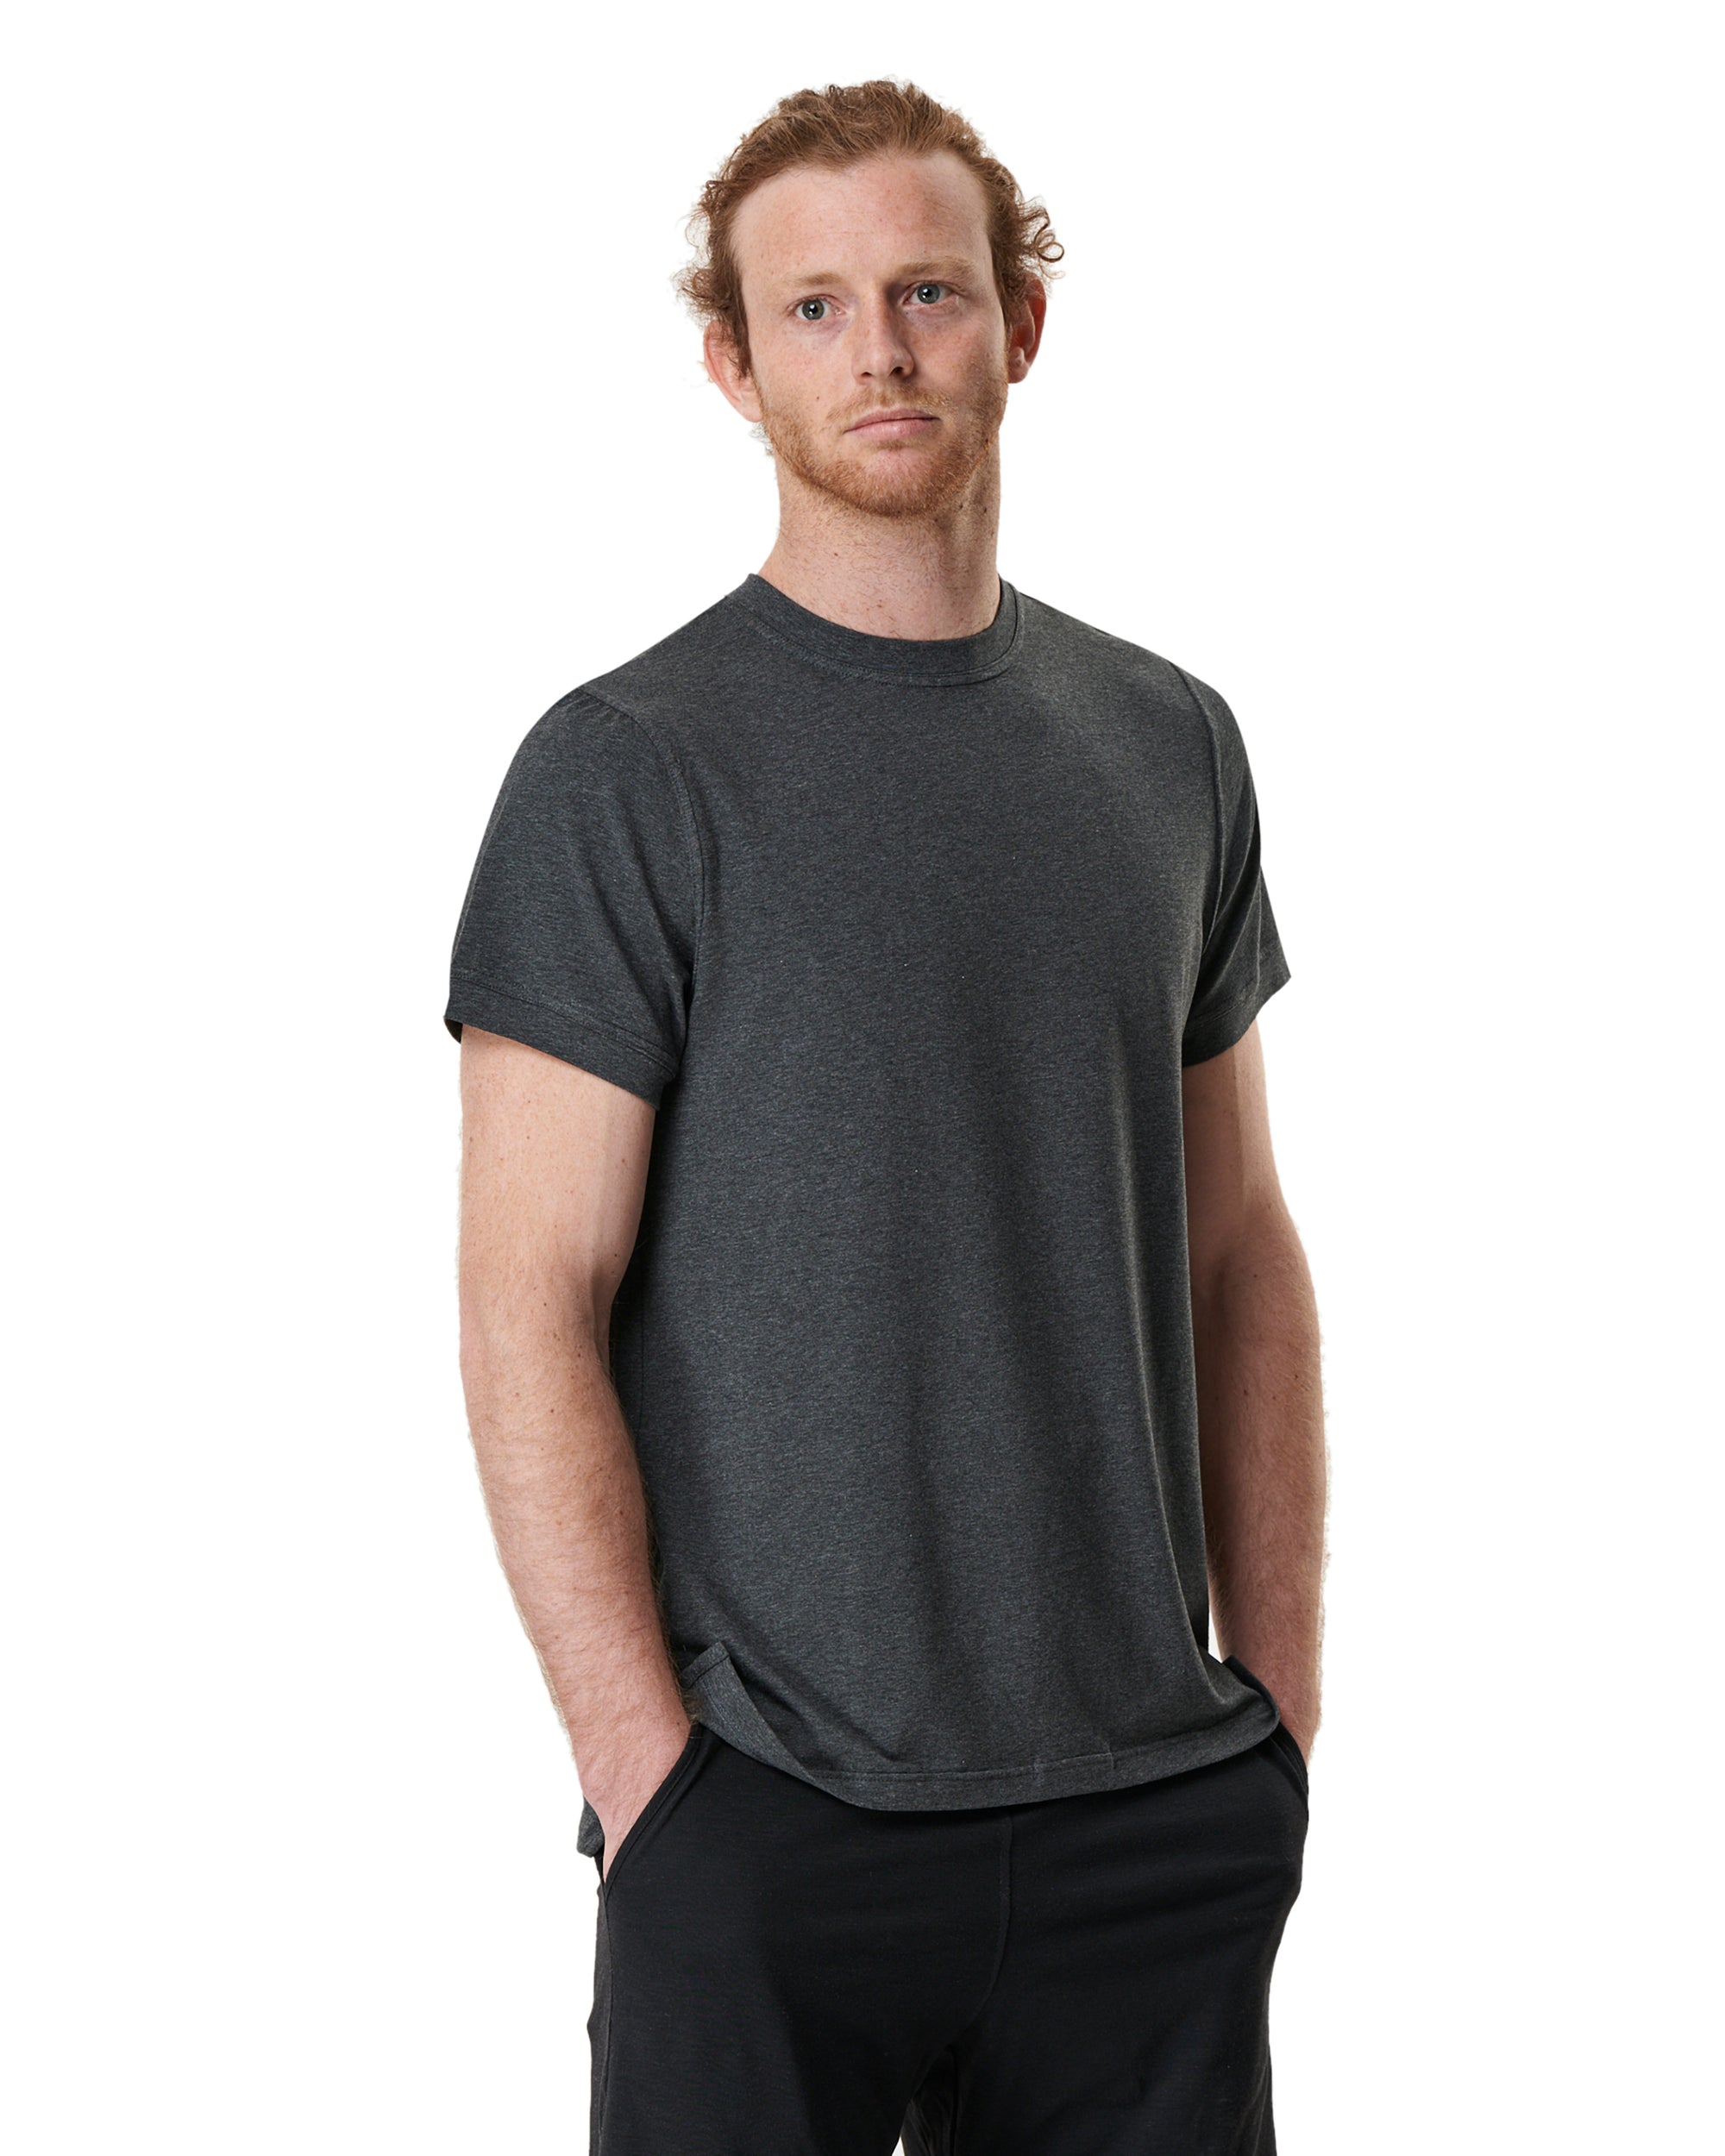 man wearing a grey men's yoga t-shirt by warrior addict front view 